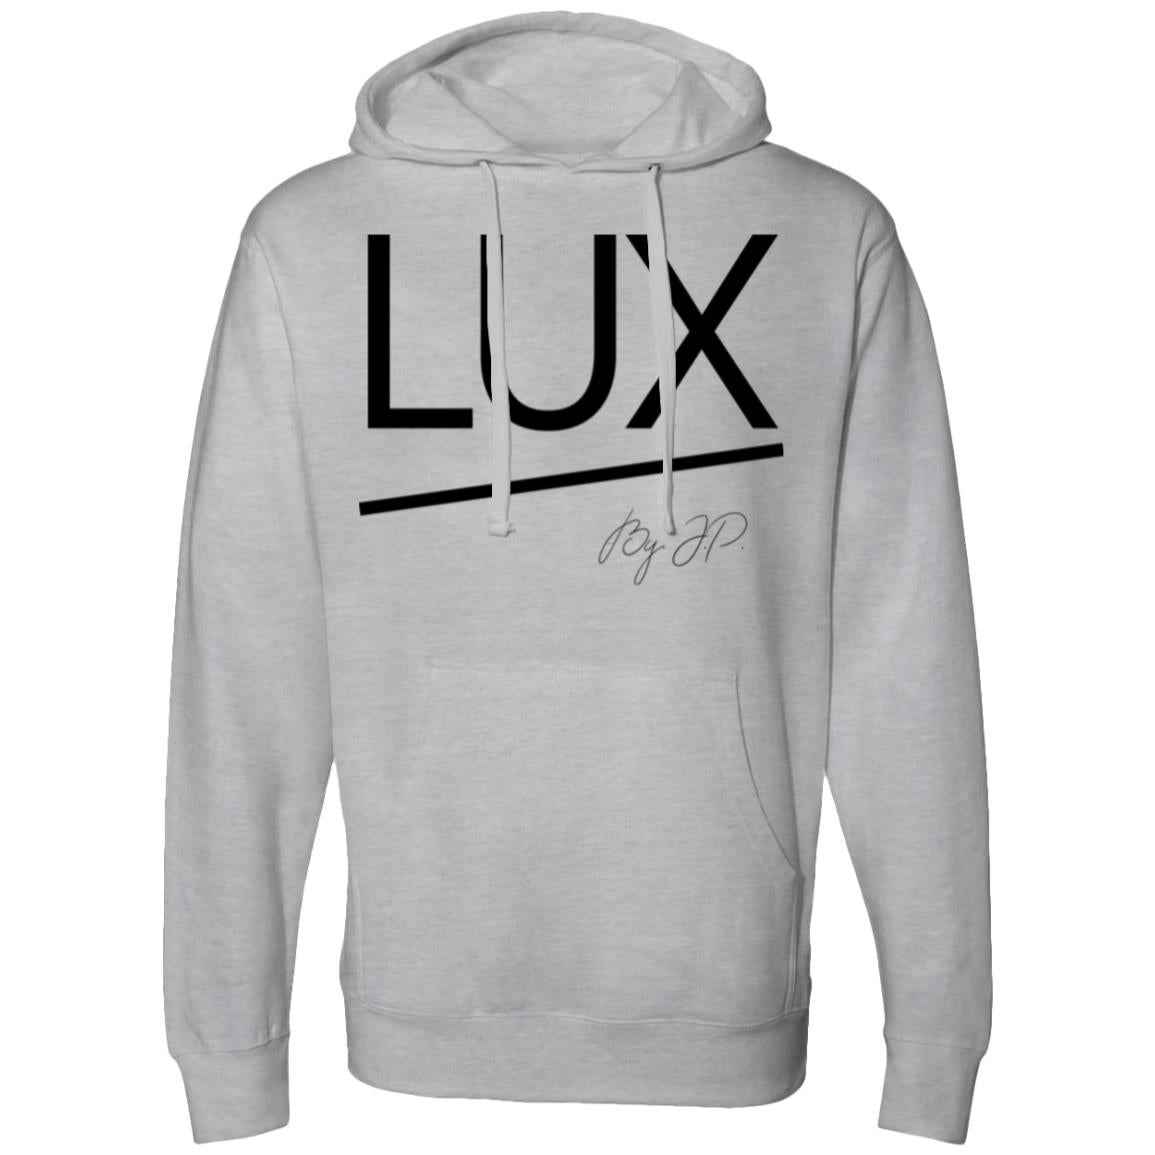 Lux.  Midweight Hoodie - Grey Heather Edition